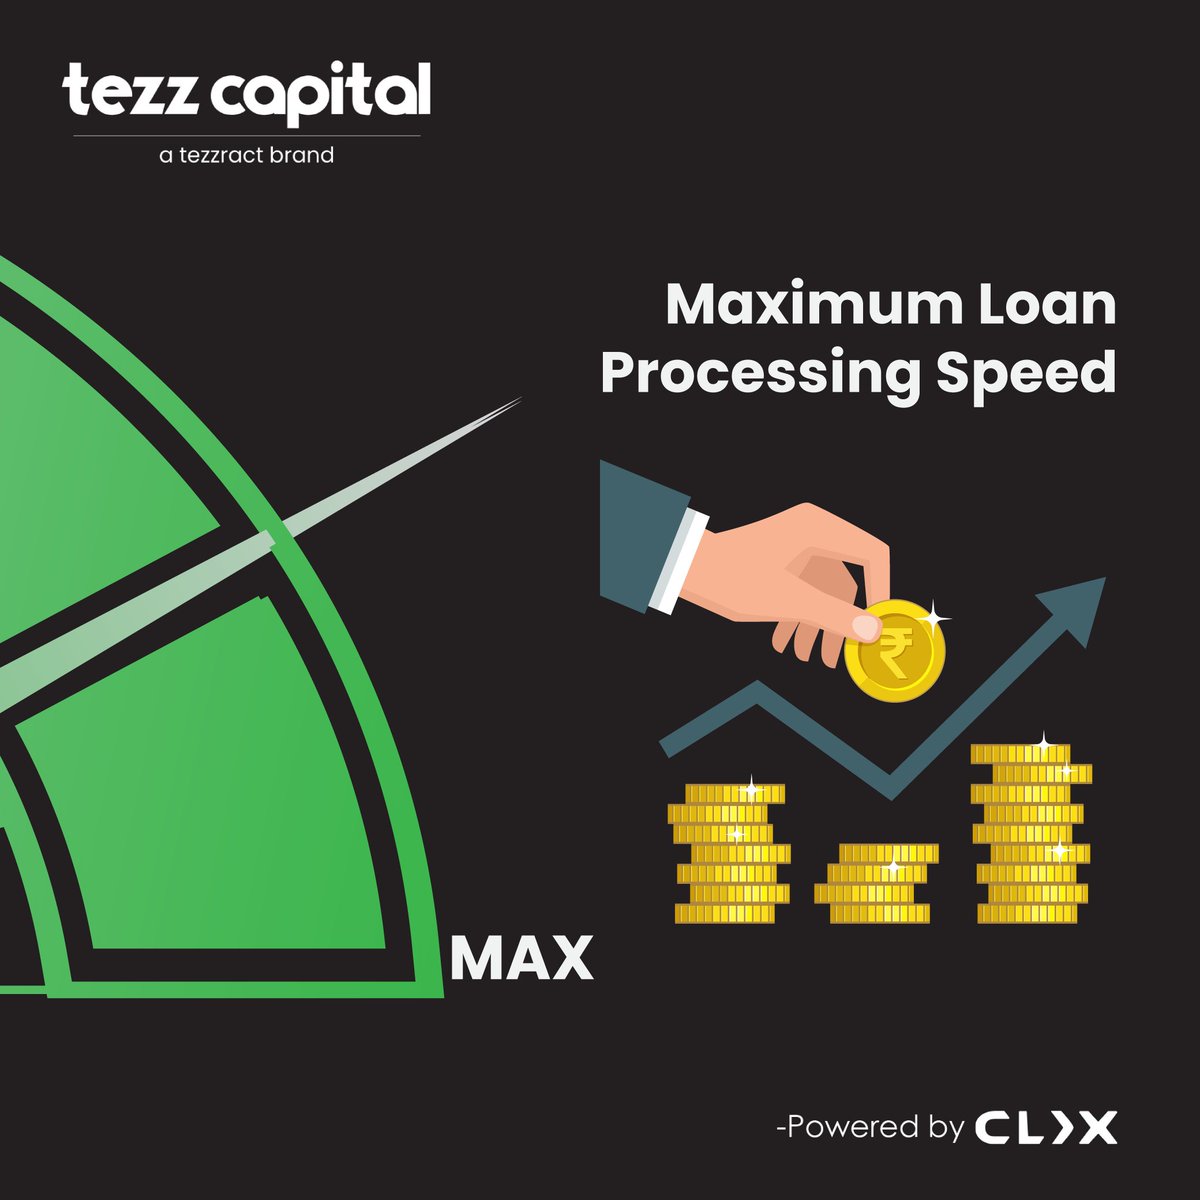 Need cash in a flash?

Our loan disbursals are faster than a speeding bullet! 💰💨
.
.
.
.
#Tezzcapital #msmeloan #gridview #businessgrowth #loanservices #businesshacks #businessinsider #raftaar #speedloan #BlackFriday #loansigningsystem #LatinGRAMMY